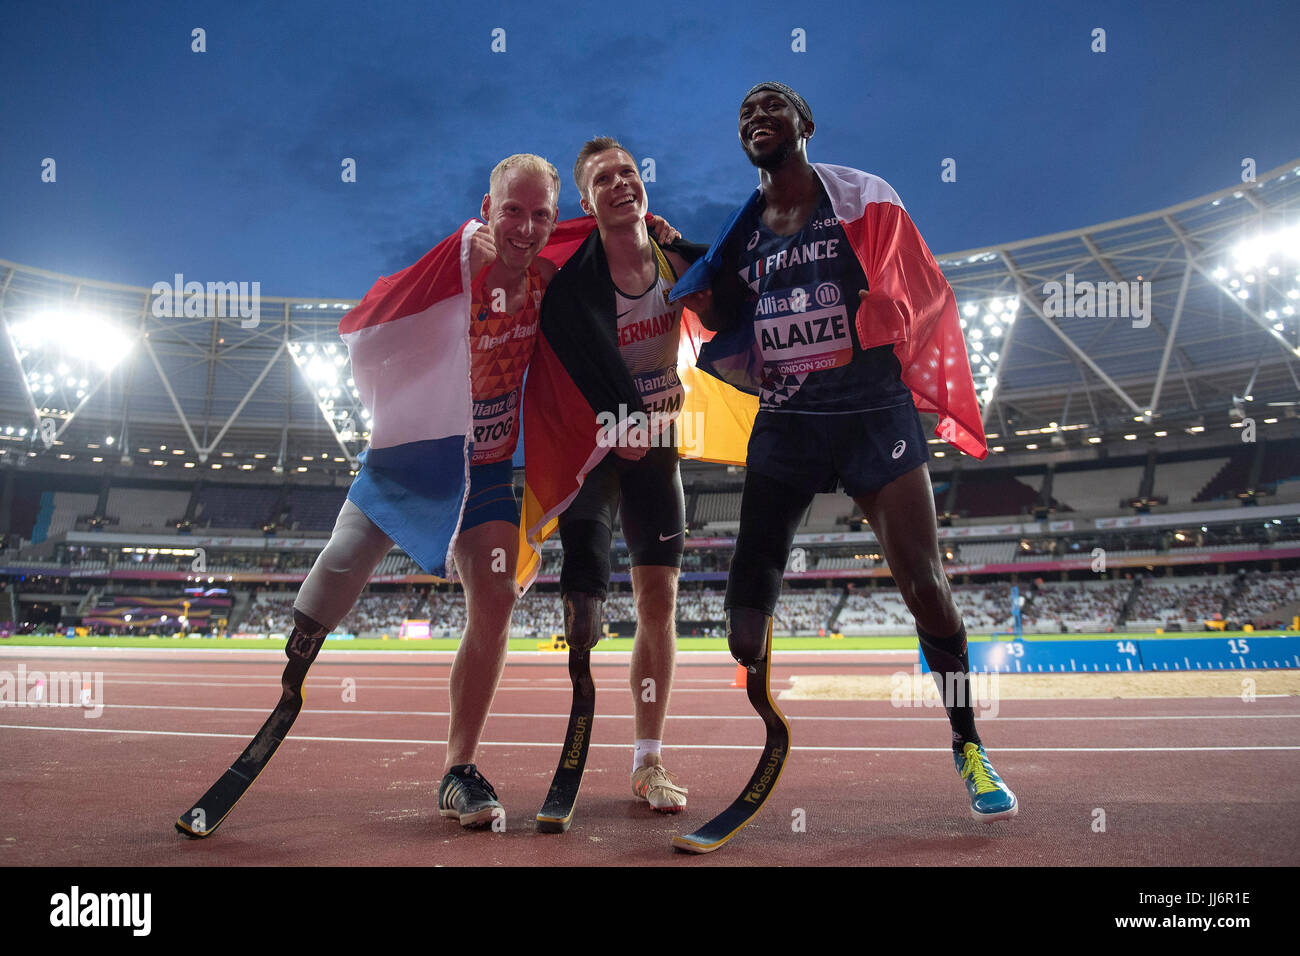 Netherland's Ronald Hertog, Germany's Markus Rehm, and France's Jean-Baptiste  Alaize celebrate their silver, gold and bronze positions following the  Men's Long Jump T44 final during day four of the 2017 World Para